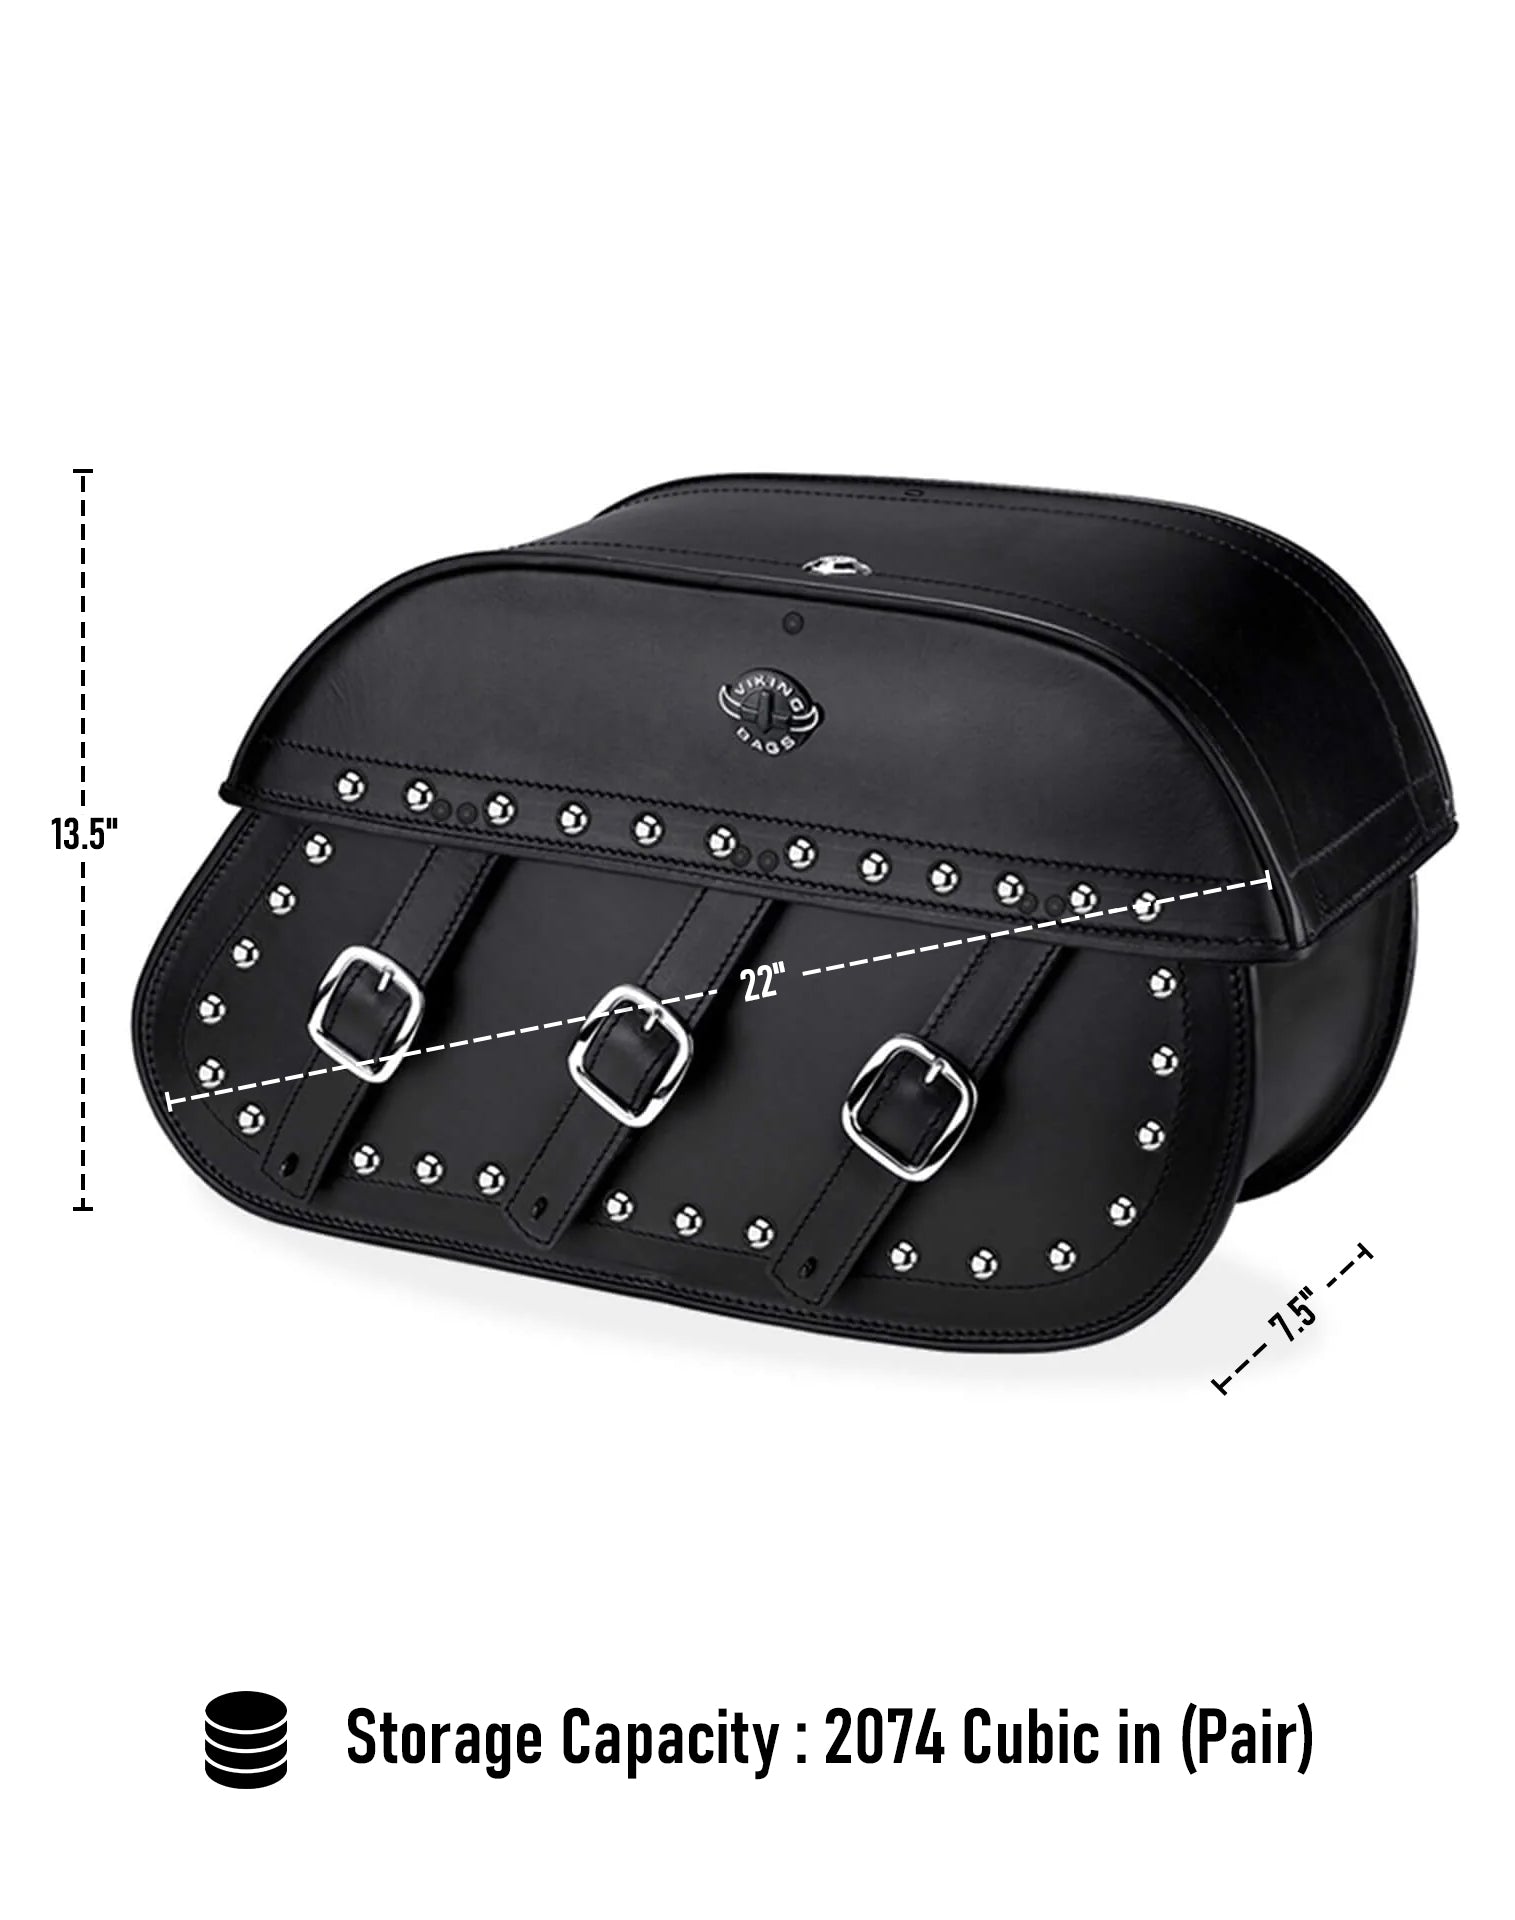 Viking Trianon Extra Large Yamaha V Star 1100 Classic Xvs11A Studded Leather Motorcycle Saddlebags Can Store Your Ridings Gears